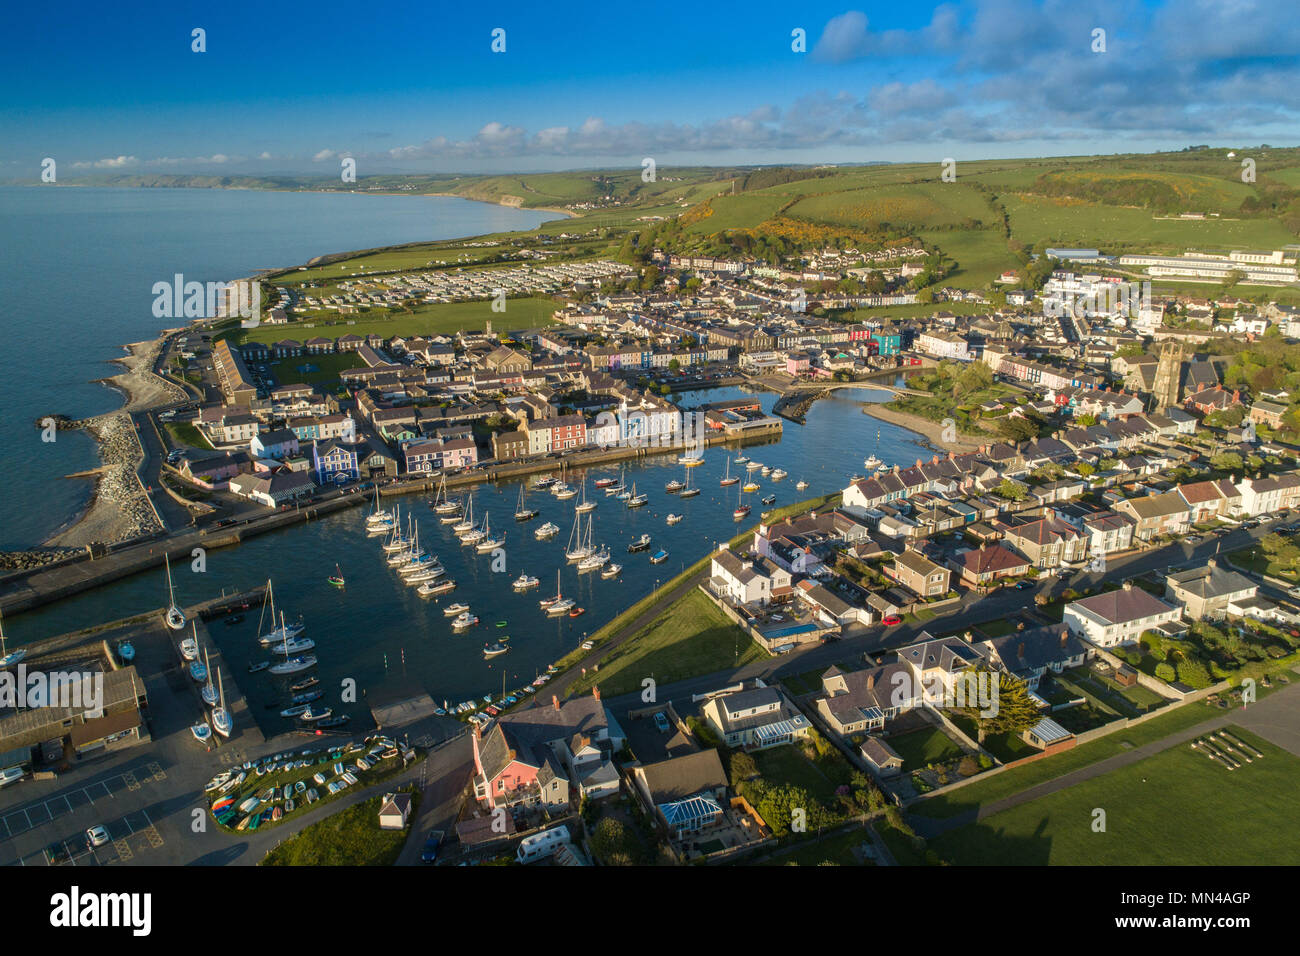 Aberaeron, Ceredigion Wales UK,  Monday May 14 2018  UK weather: a gloriously sunny evening in Aberaeron, a small town on the west Wales coast, with its houses huddled around its picturesque harbour  Arial photo by CAA licenced drone pilot  photo © Keith Morris / Alamy Live News Stock Photo